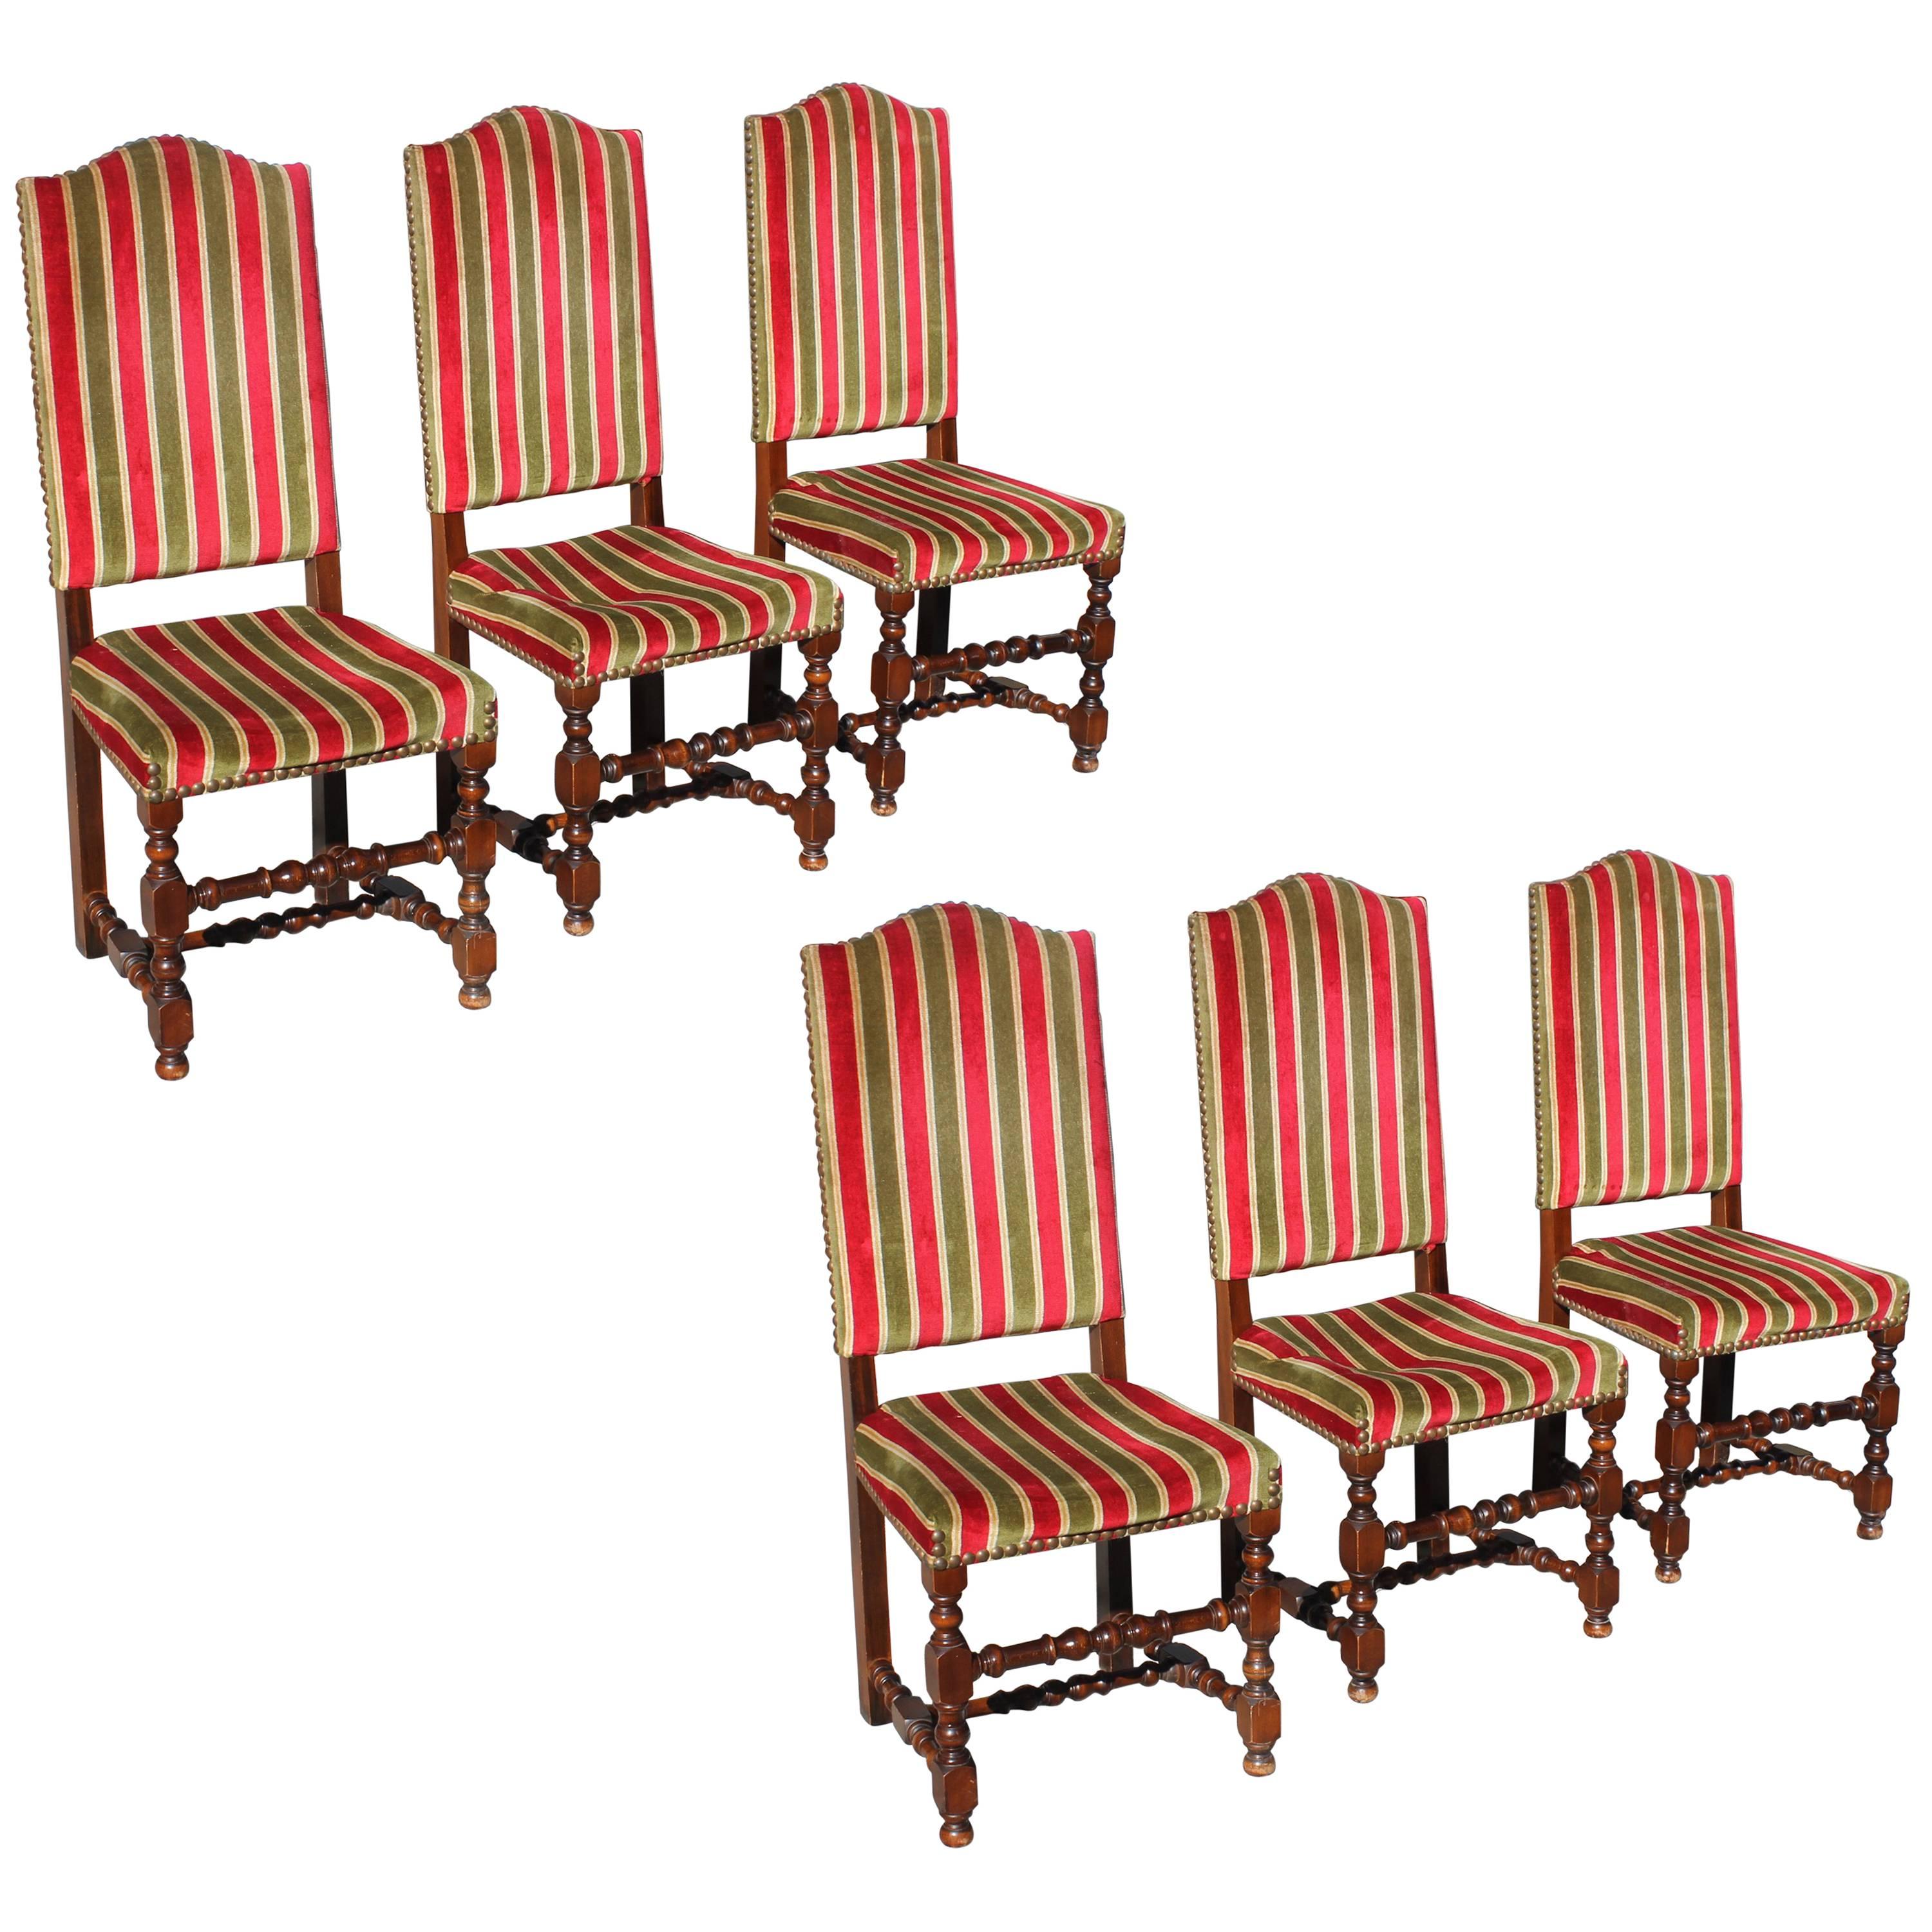 Beautiful Set of Six Louis XIII Style Dining Chairs, Solid Walnut, circa 1880